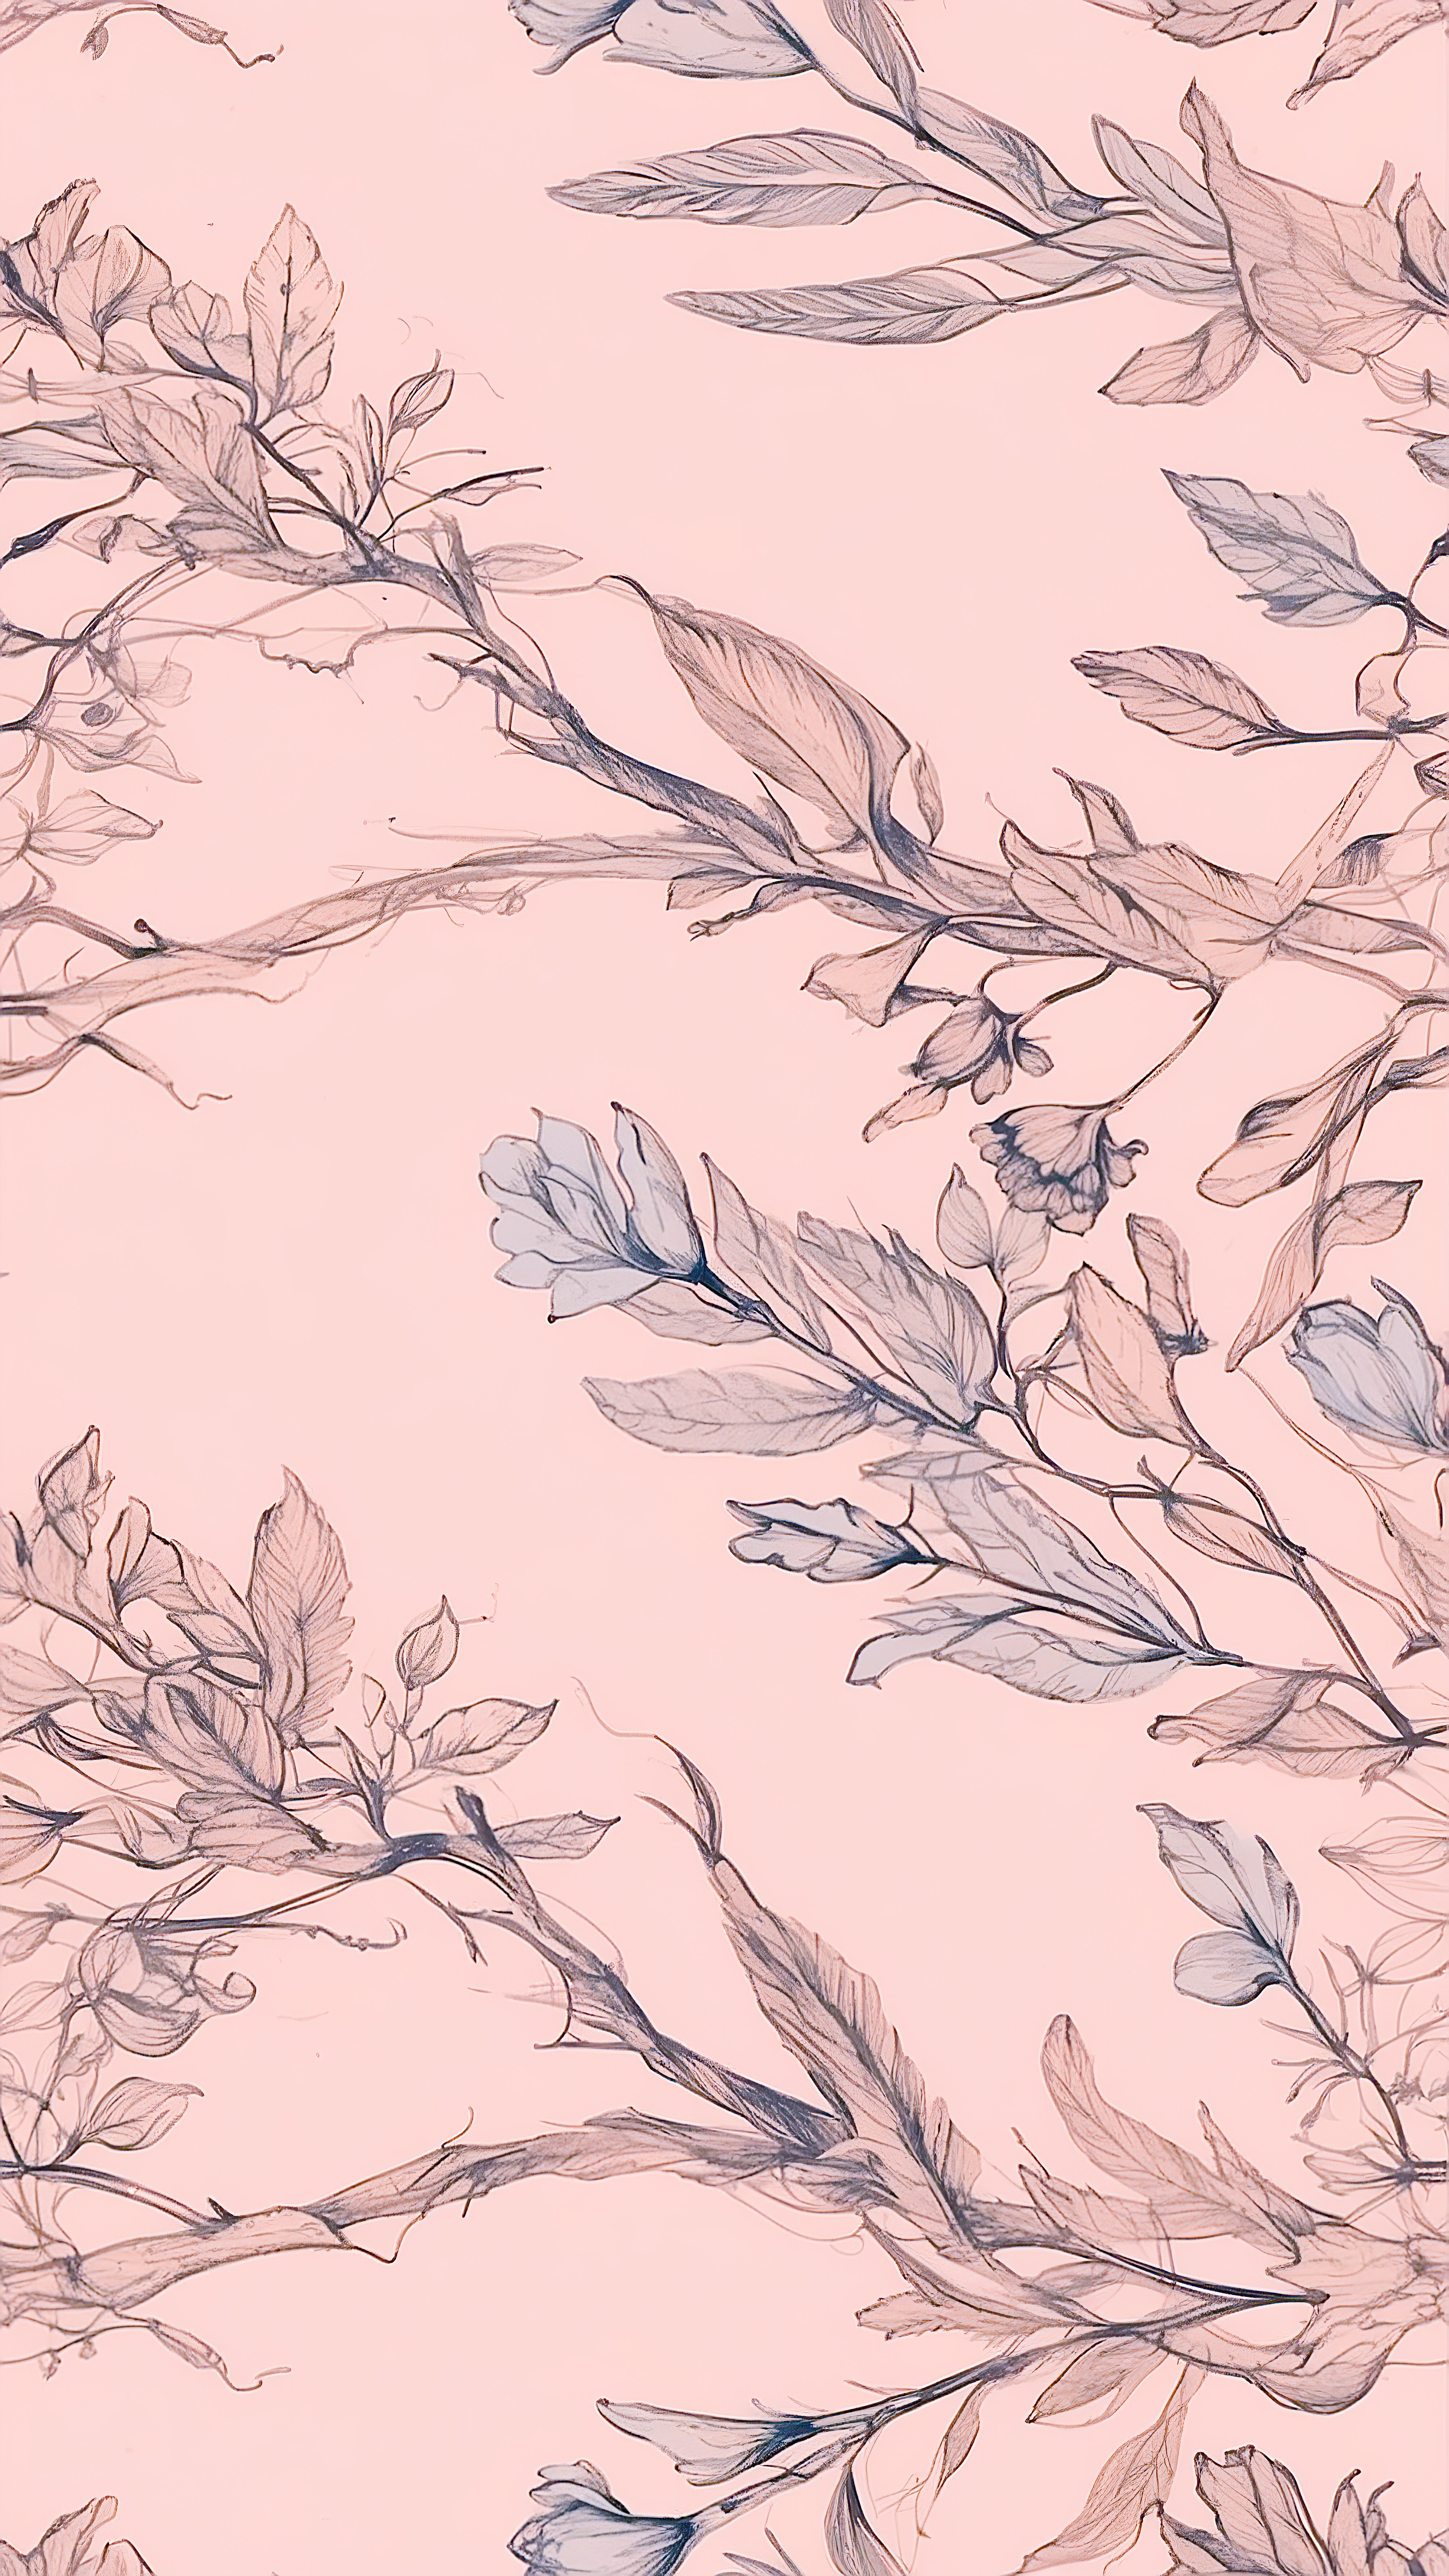 Transform your device’s look with our iPhone pastel cute wallpapers, showcasing dried floral branches against a soft pink background that adds a touch of nature to your screen.